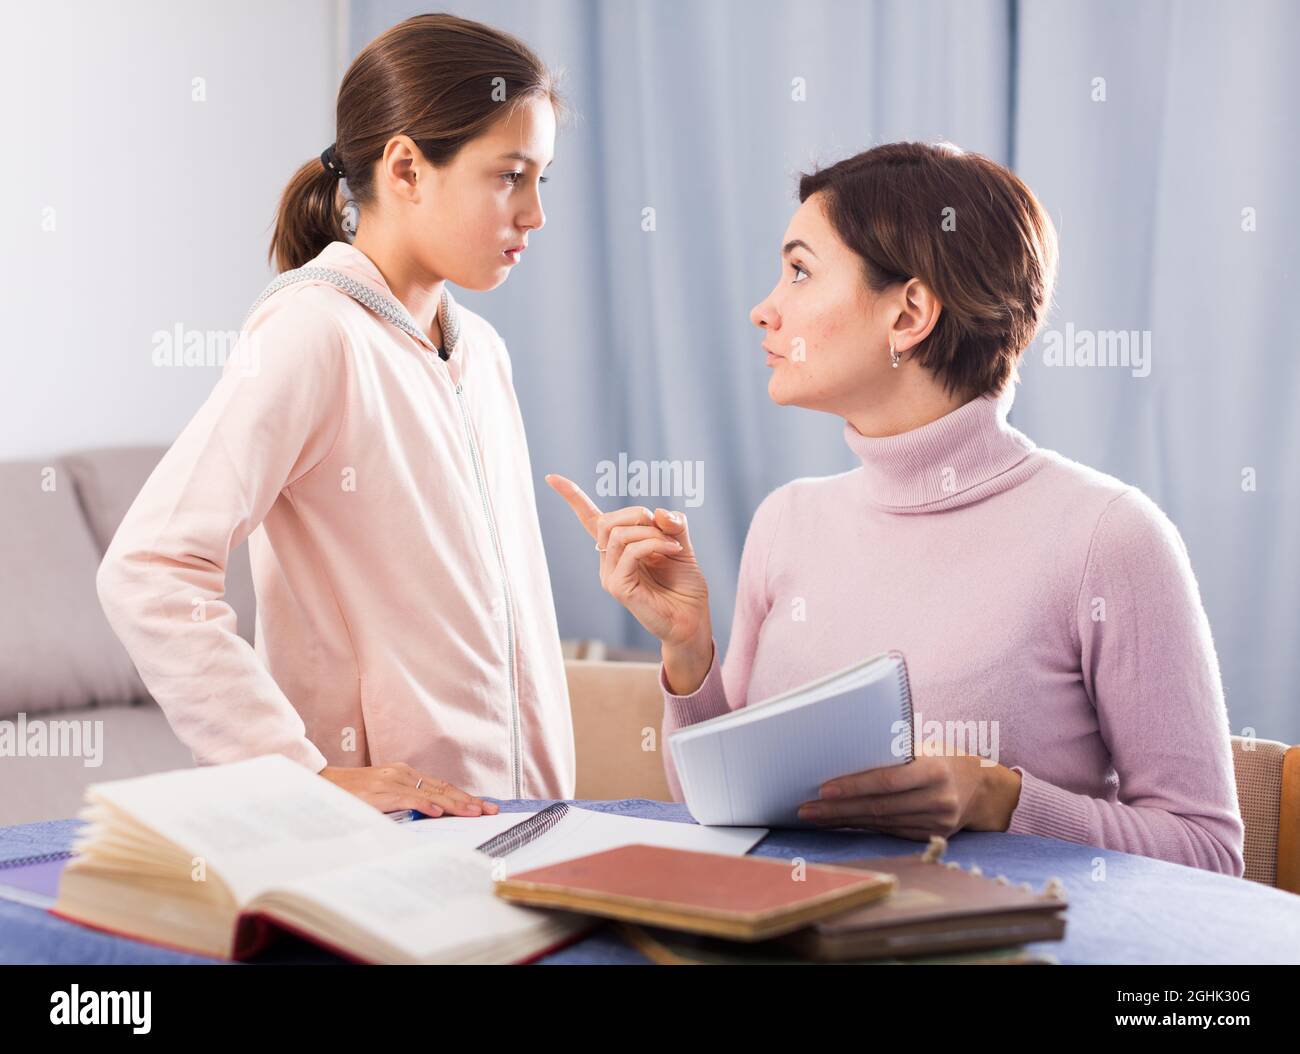 Mother teaches daughter Stock Photo